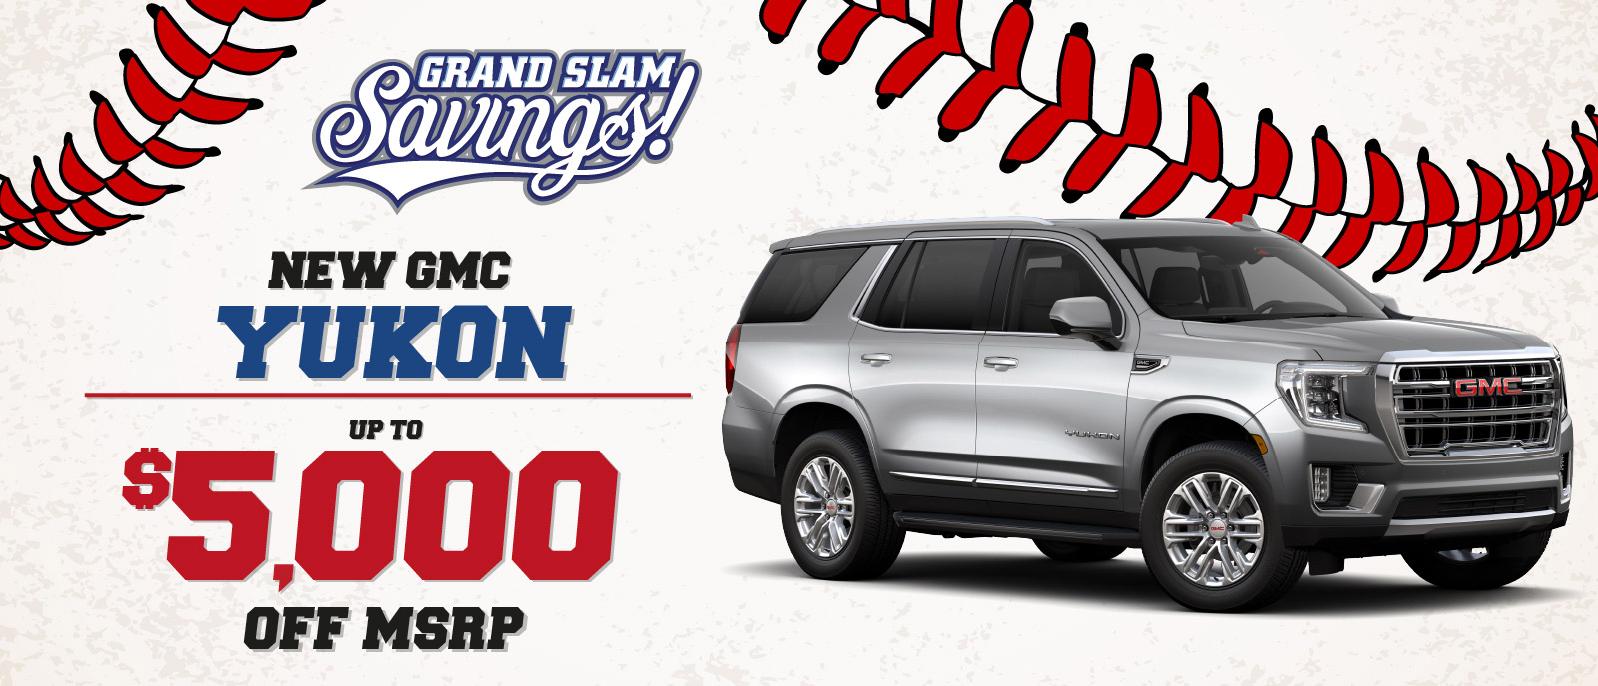 New GMC Yukon - up to $5000 OFF MSRP